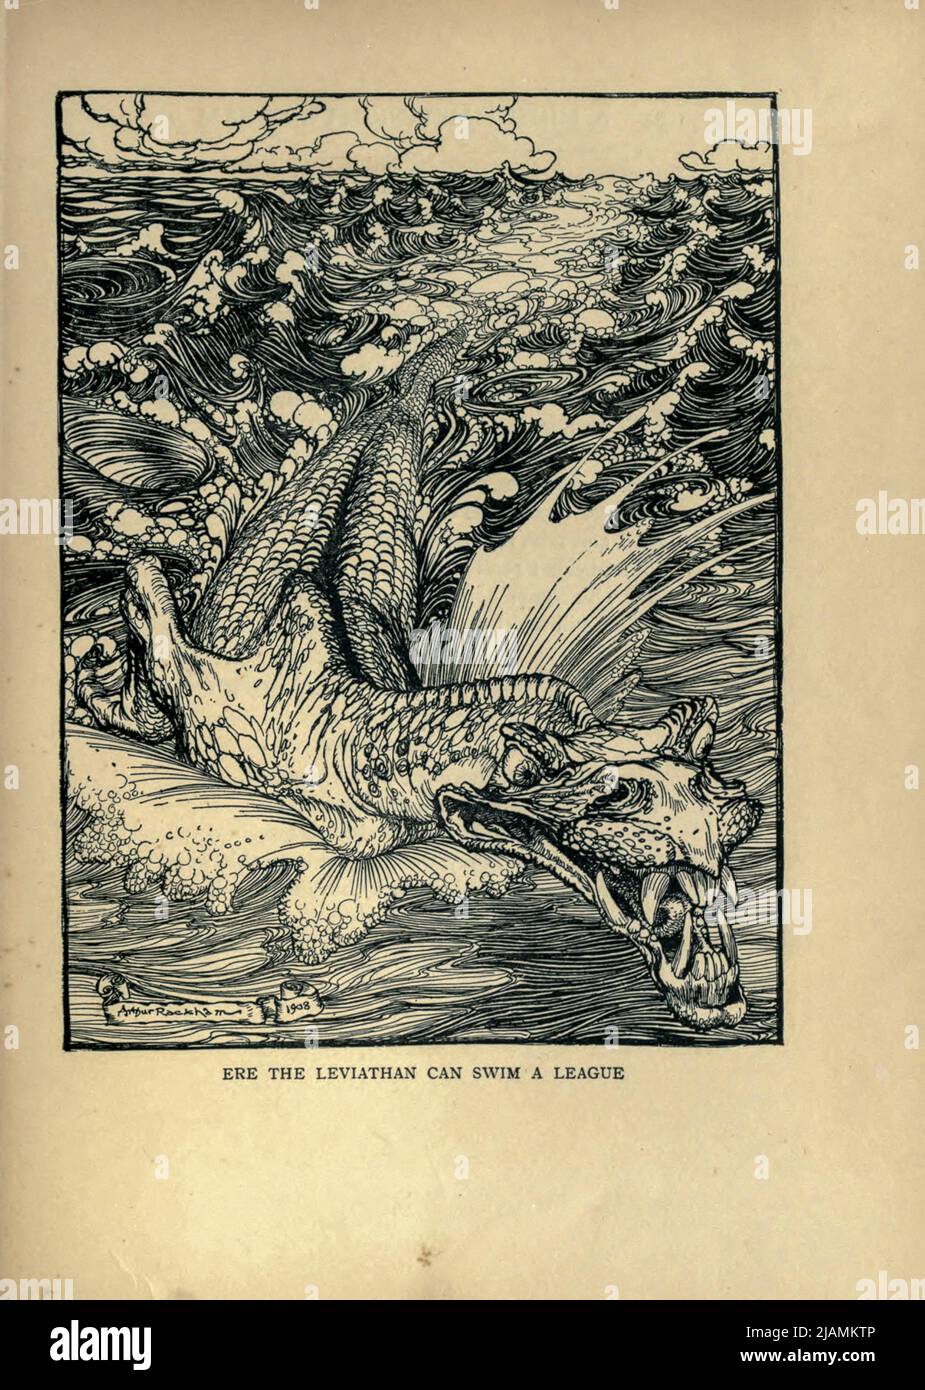 ERE The Léviathan CAN Swim a League from ' A midsummer Night's Dream ' by William Shakespeare, 1564-1616; Illustrated by Arthur Rackham, 1867-1939 Date de publication 1908 Publisher London, Heinemann; New York, Doubleday, page & Co Banque D'Images